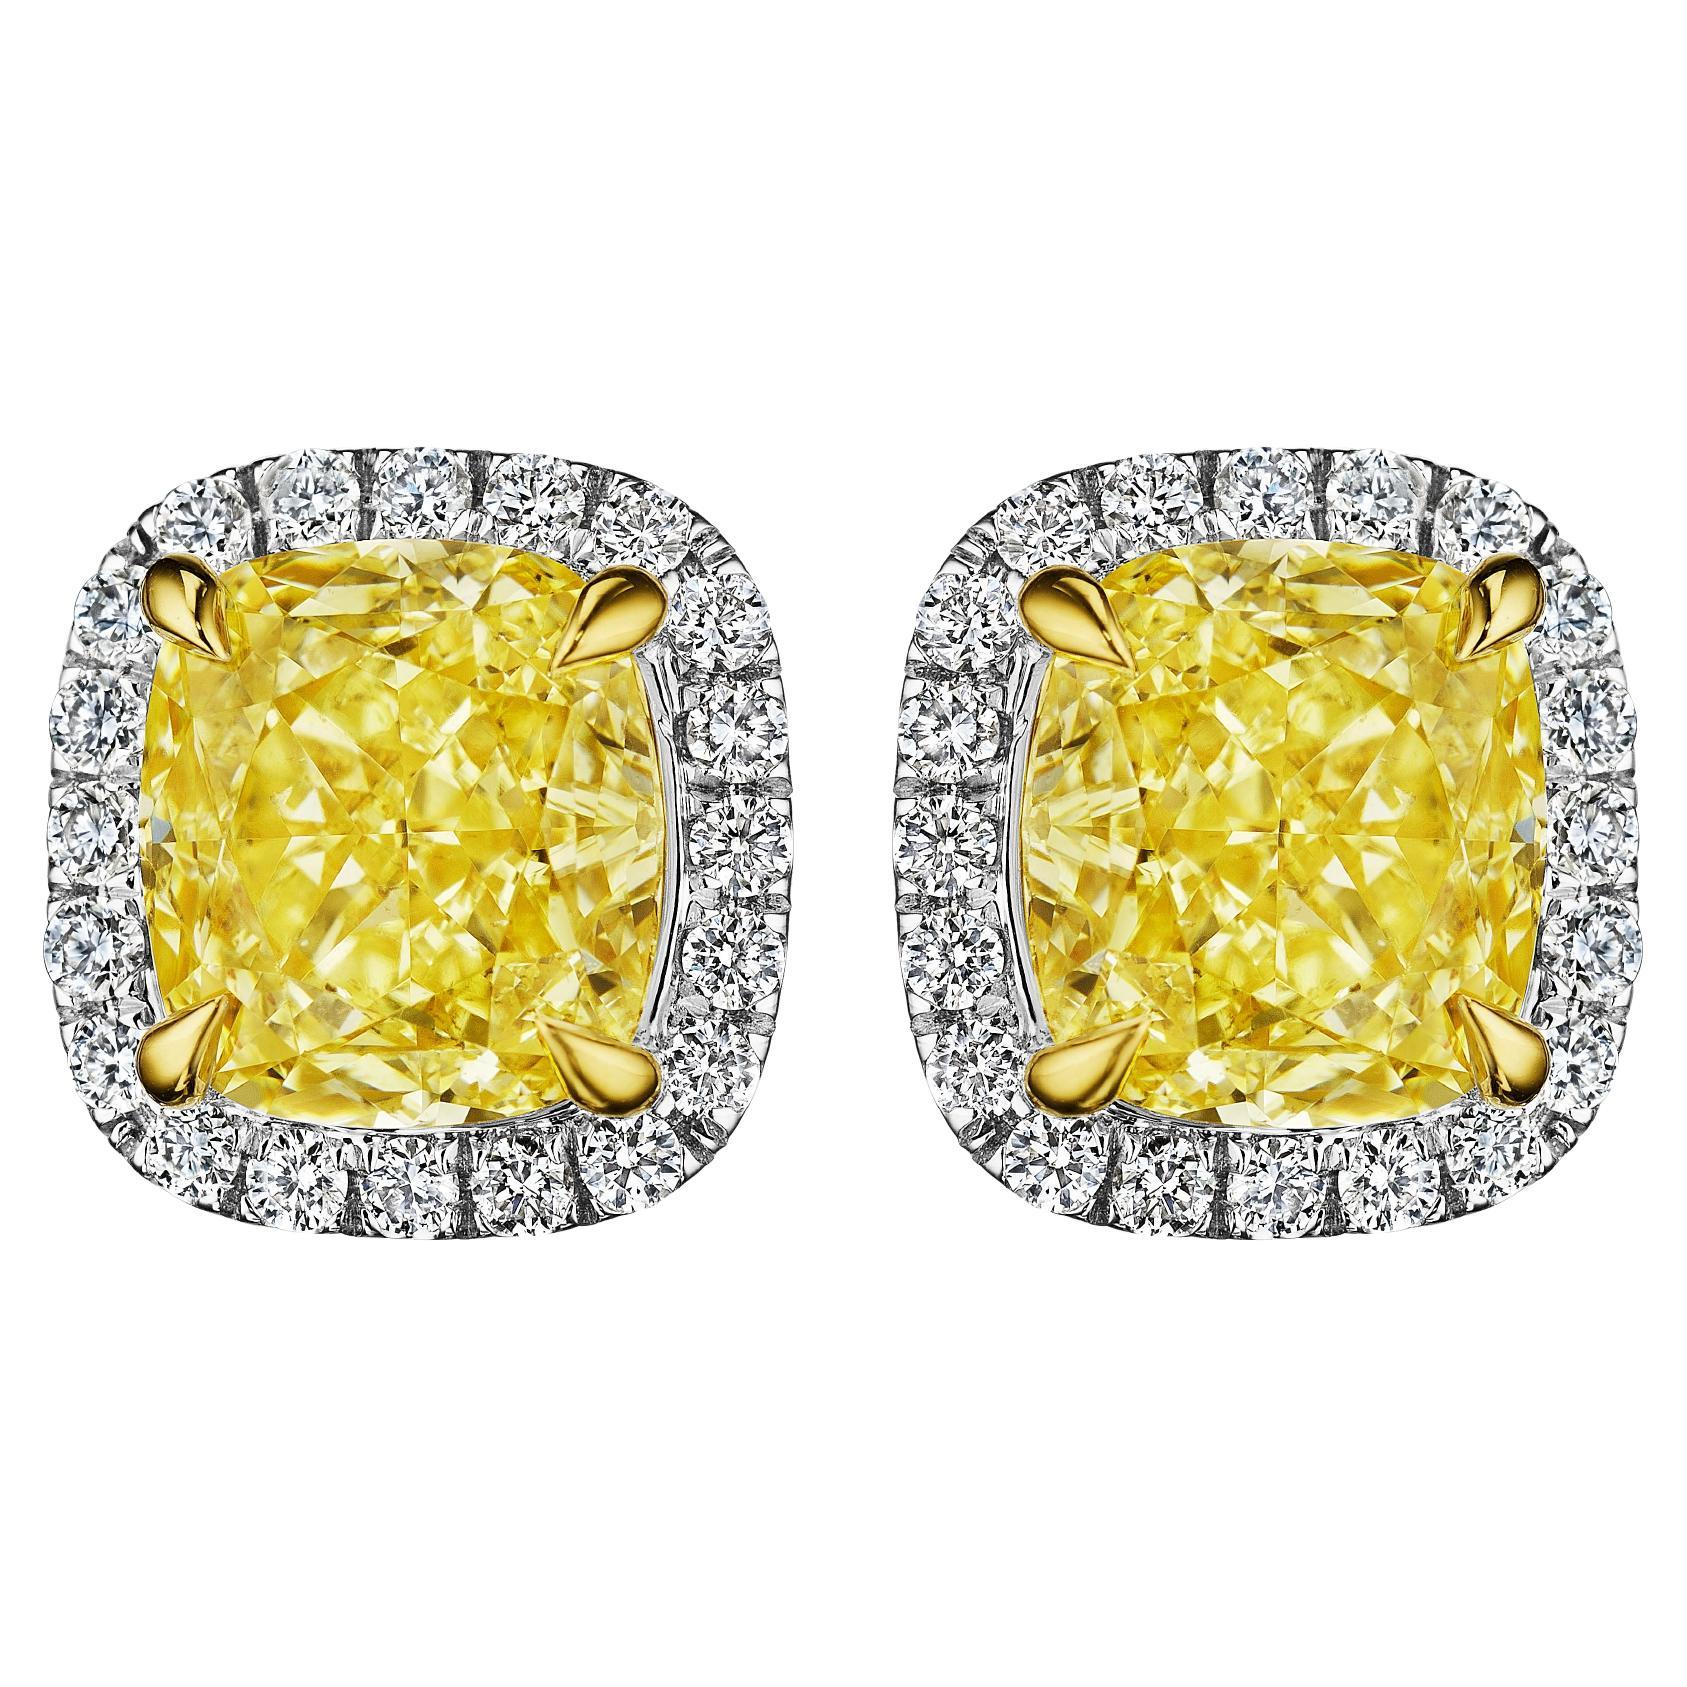 4.24ct GIA Certified Fancy Yellow Cushion & Round Diamond Earrings in 18KT Gold For Sale